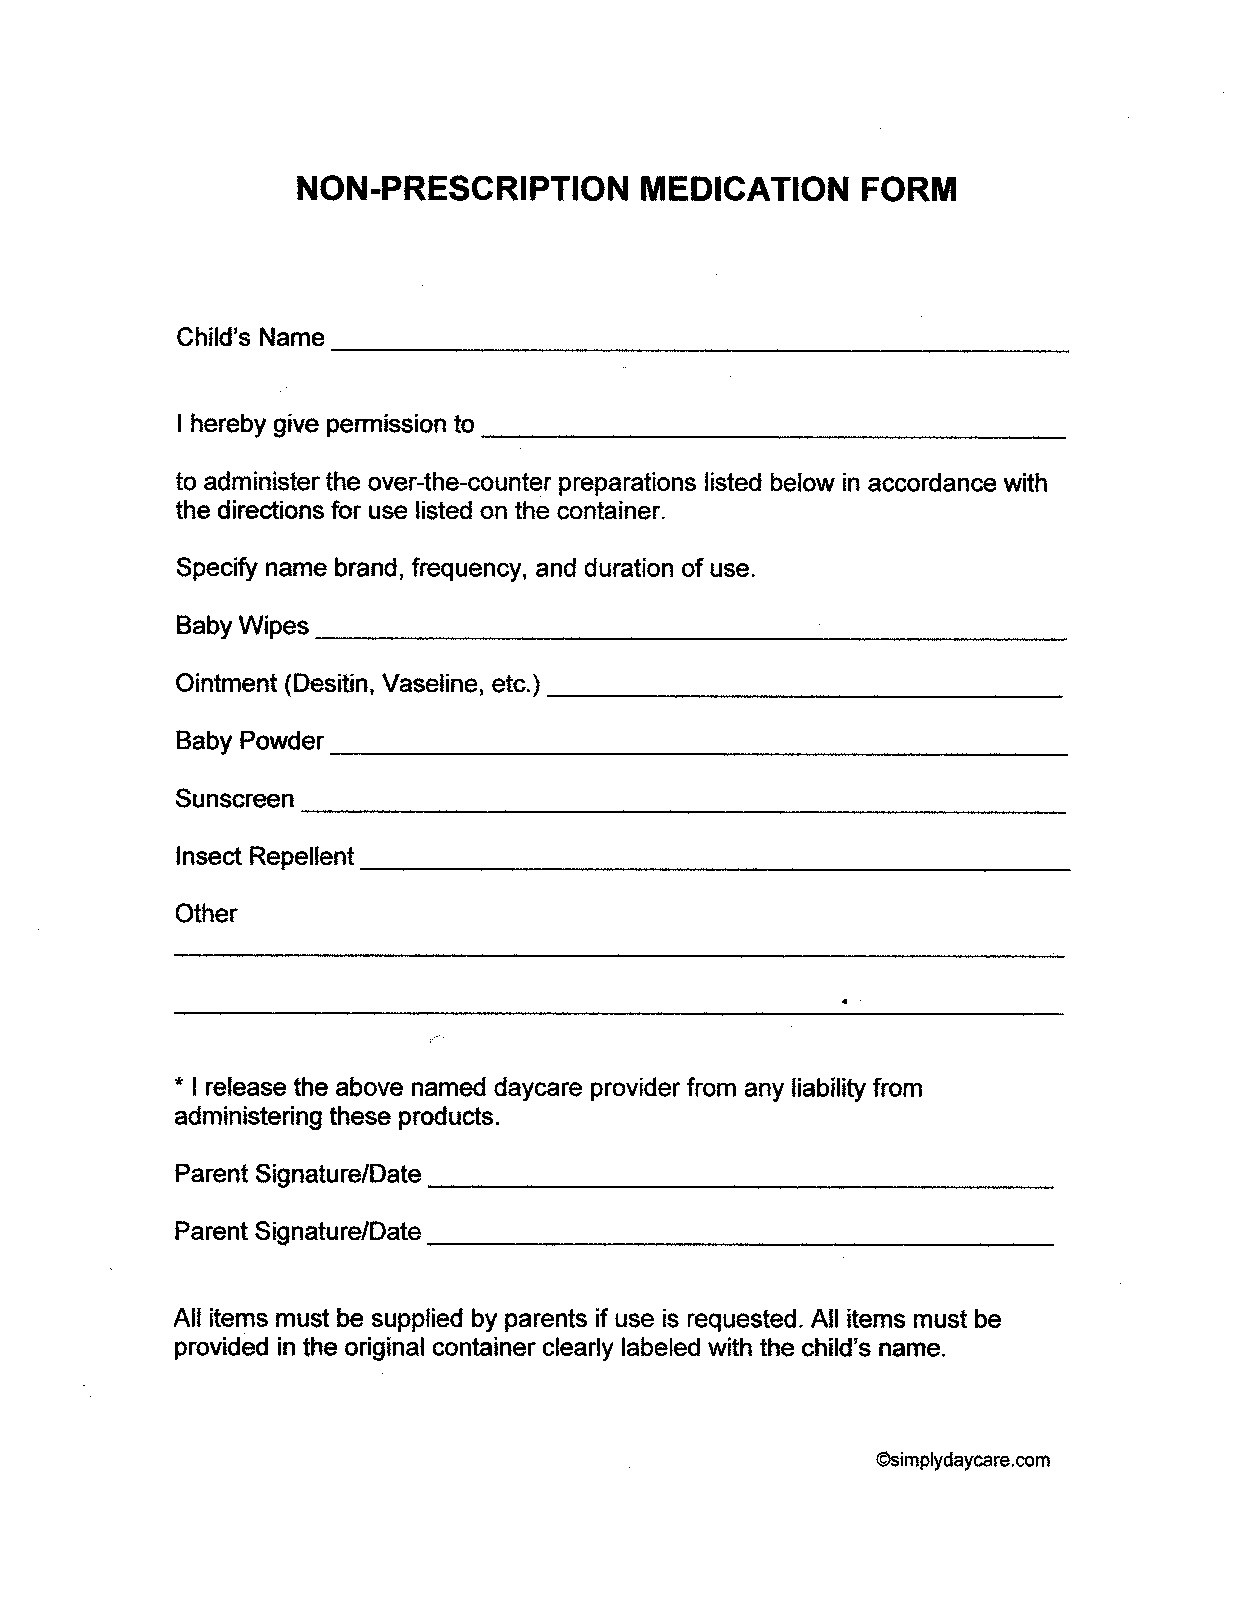 Free Child Care Forms - Over-The-Counter Medication Form - Free Printable Daycare Forms